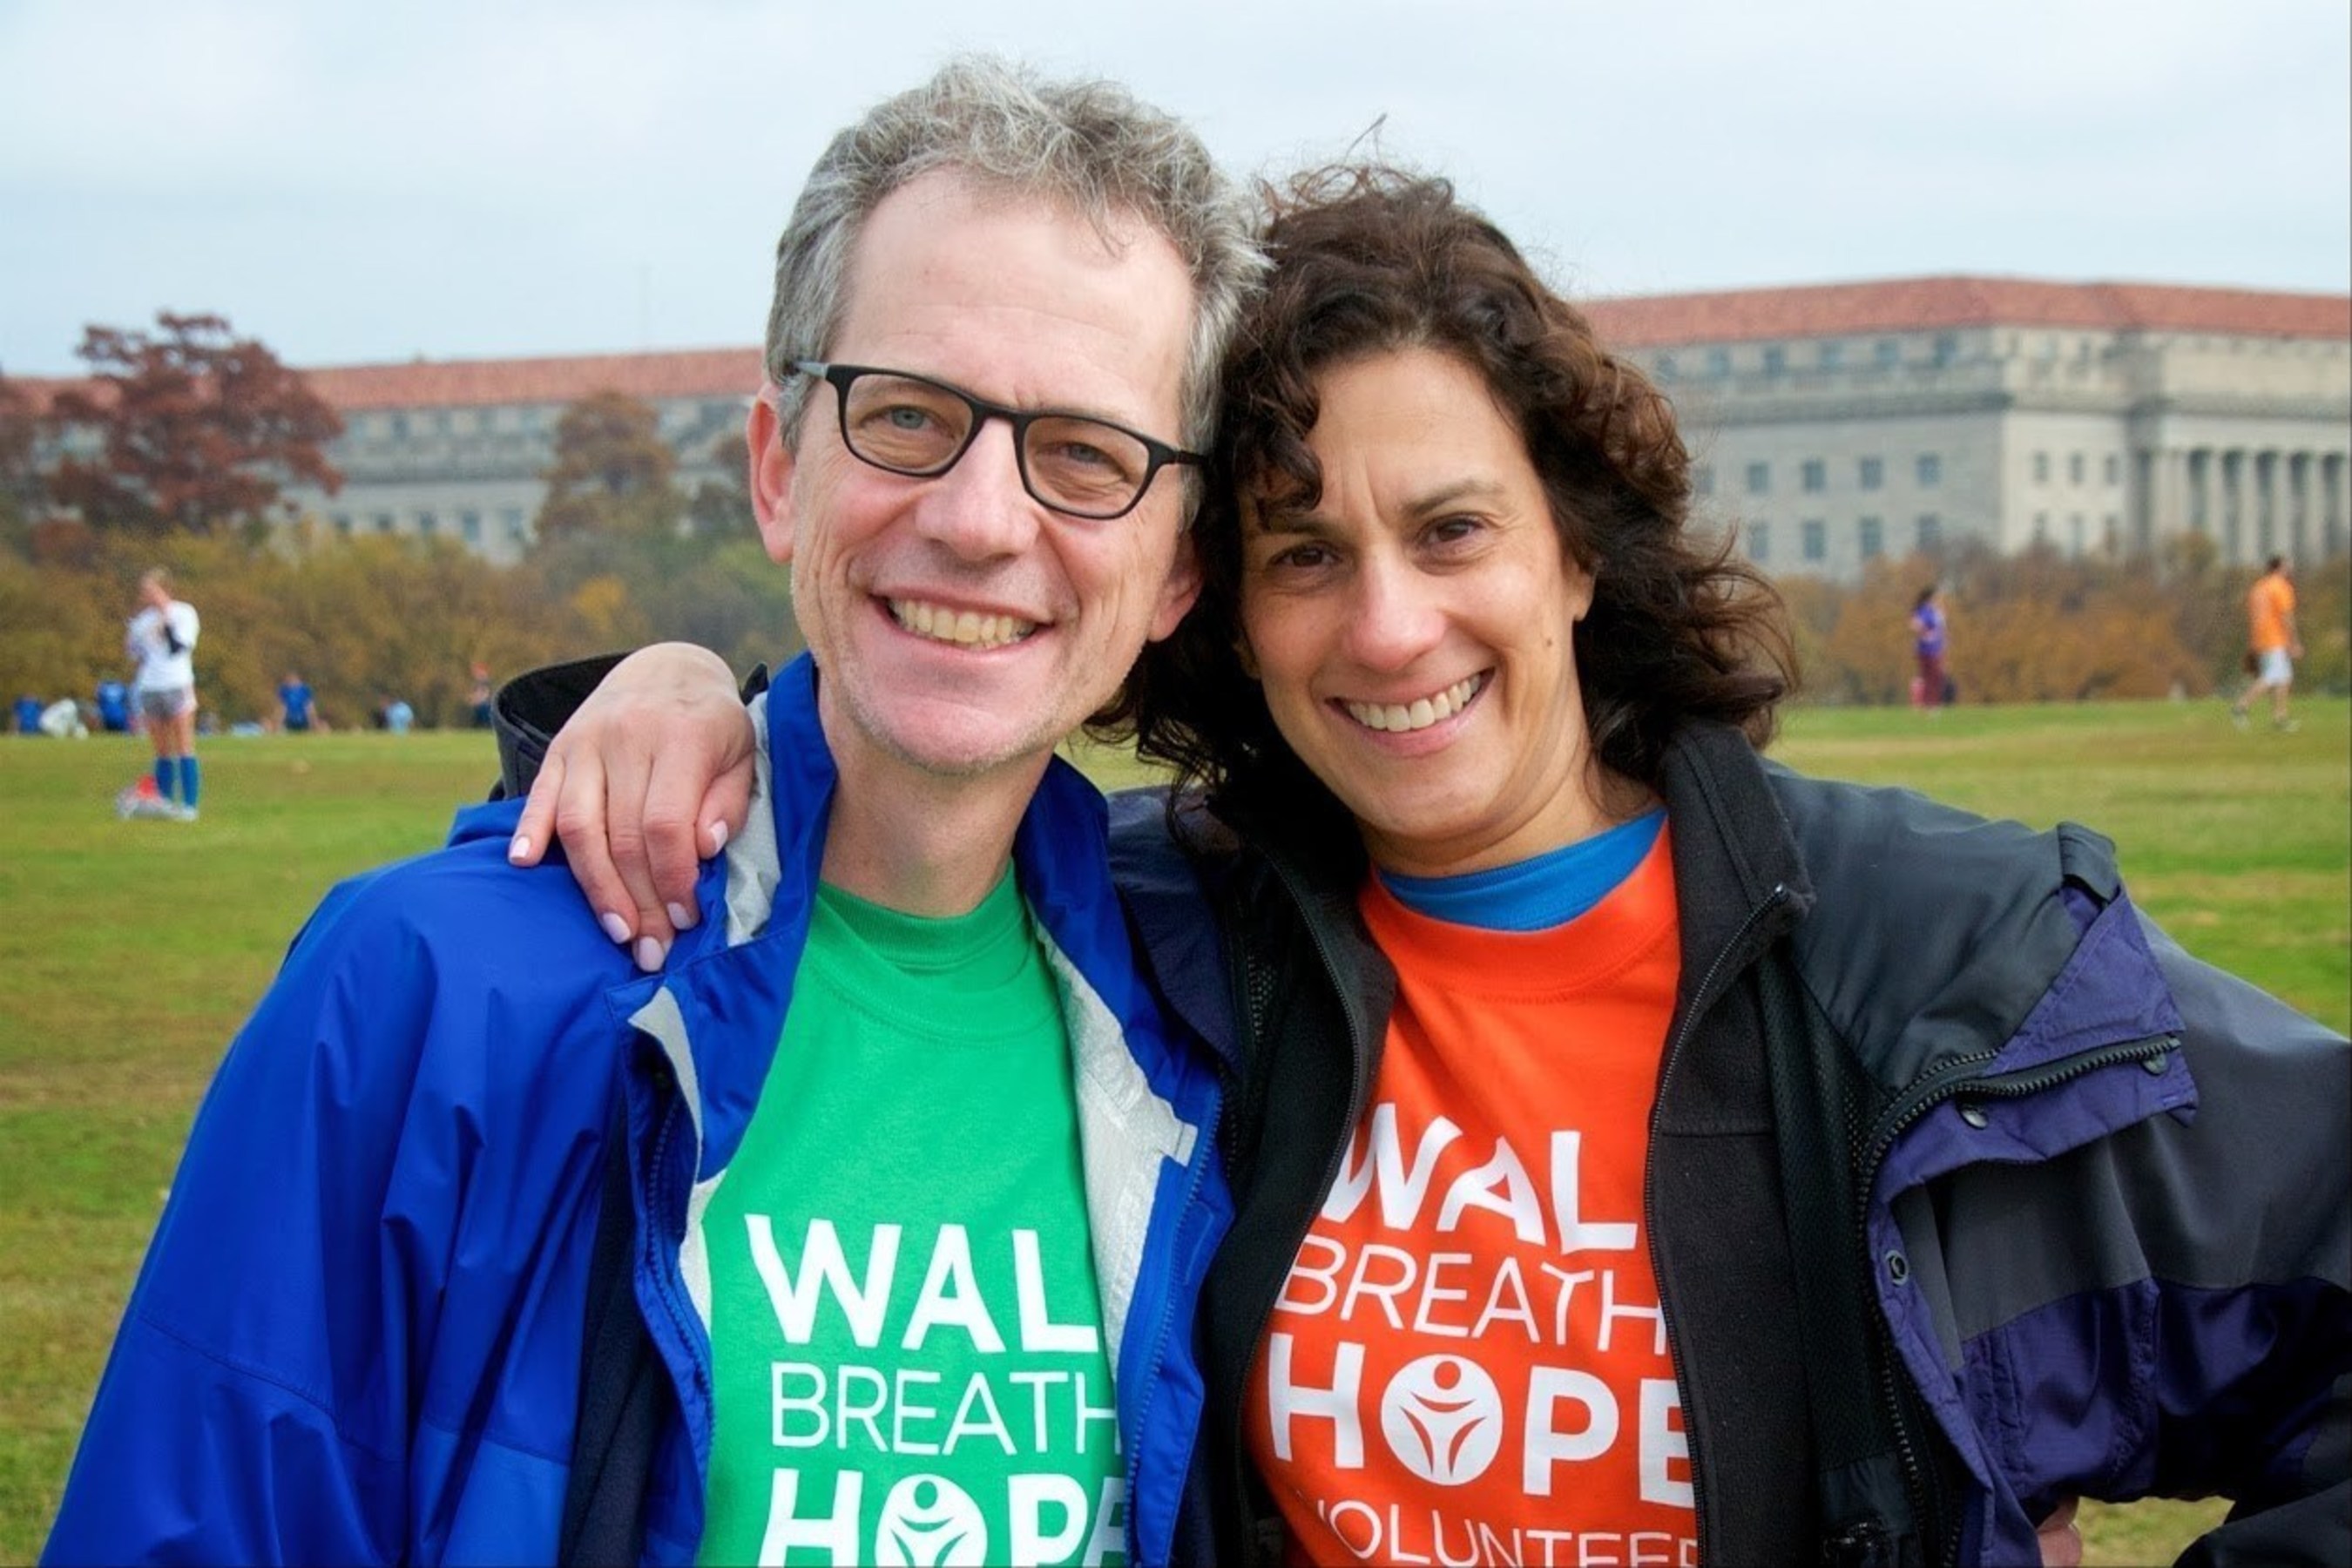 Jerry Sorkin and wife Lisa at Breathe Deep DC lung cancer walk. Jerry, LUNGevity's Vice Chairman of the Board, died on October 26, 2016.